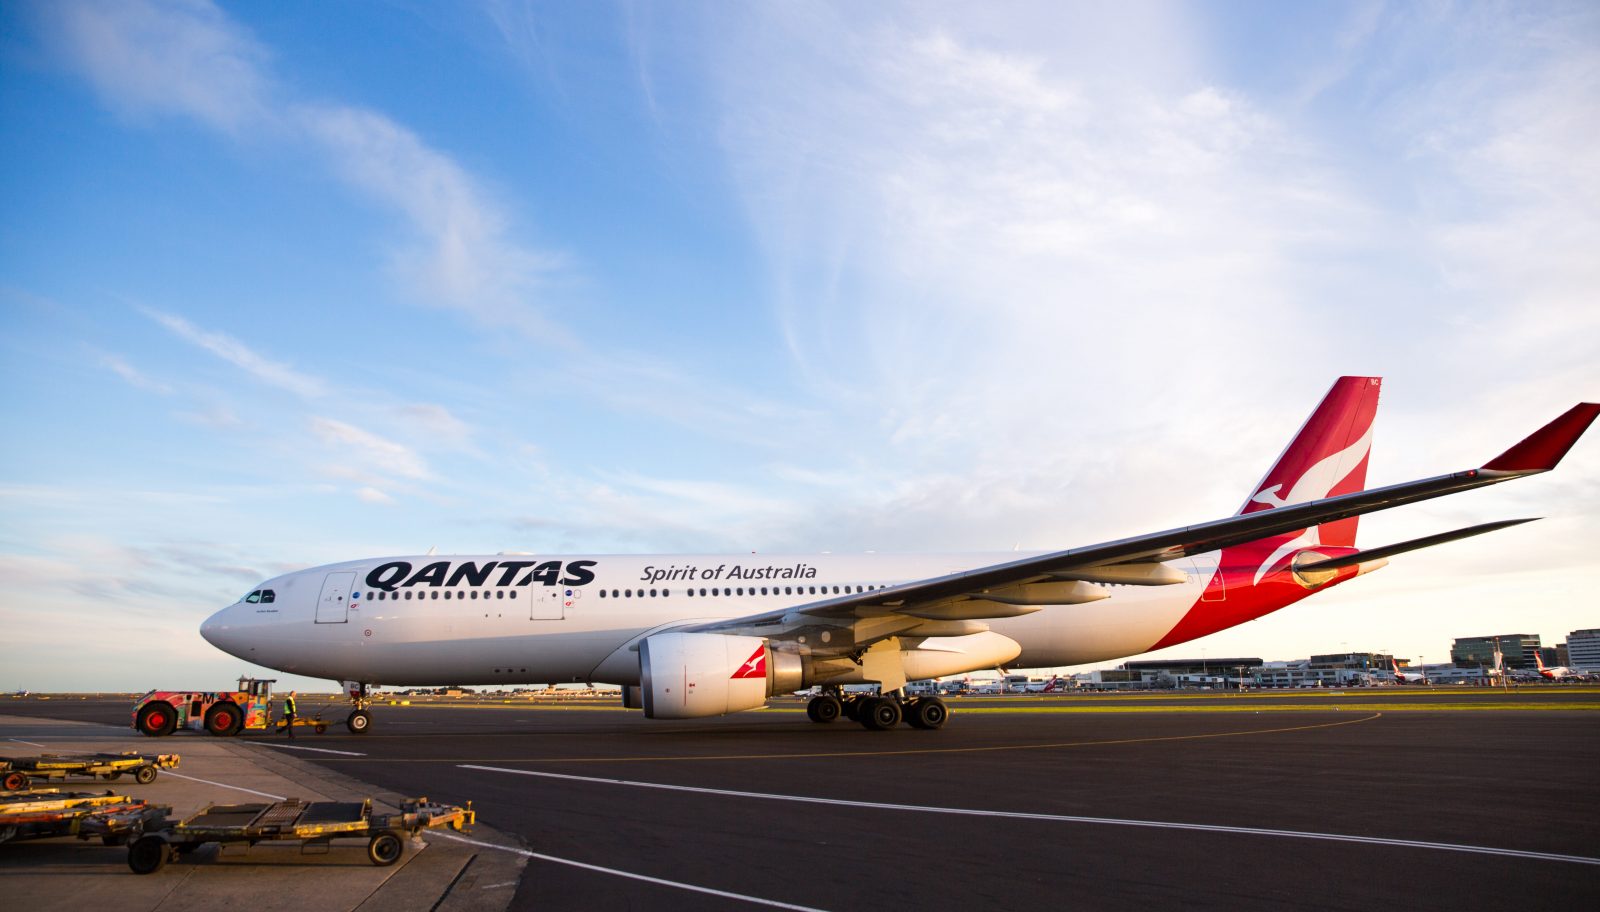 Qantas Eyes 'The Last Frontier' in Aviation as Chief Exec Tells Australian's They've Never Had it So Good